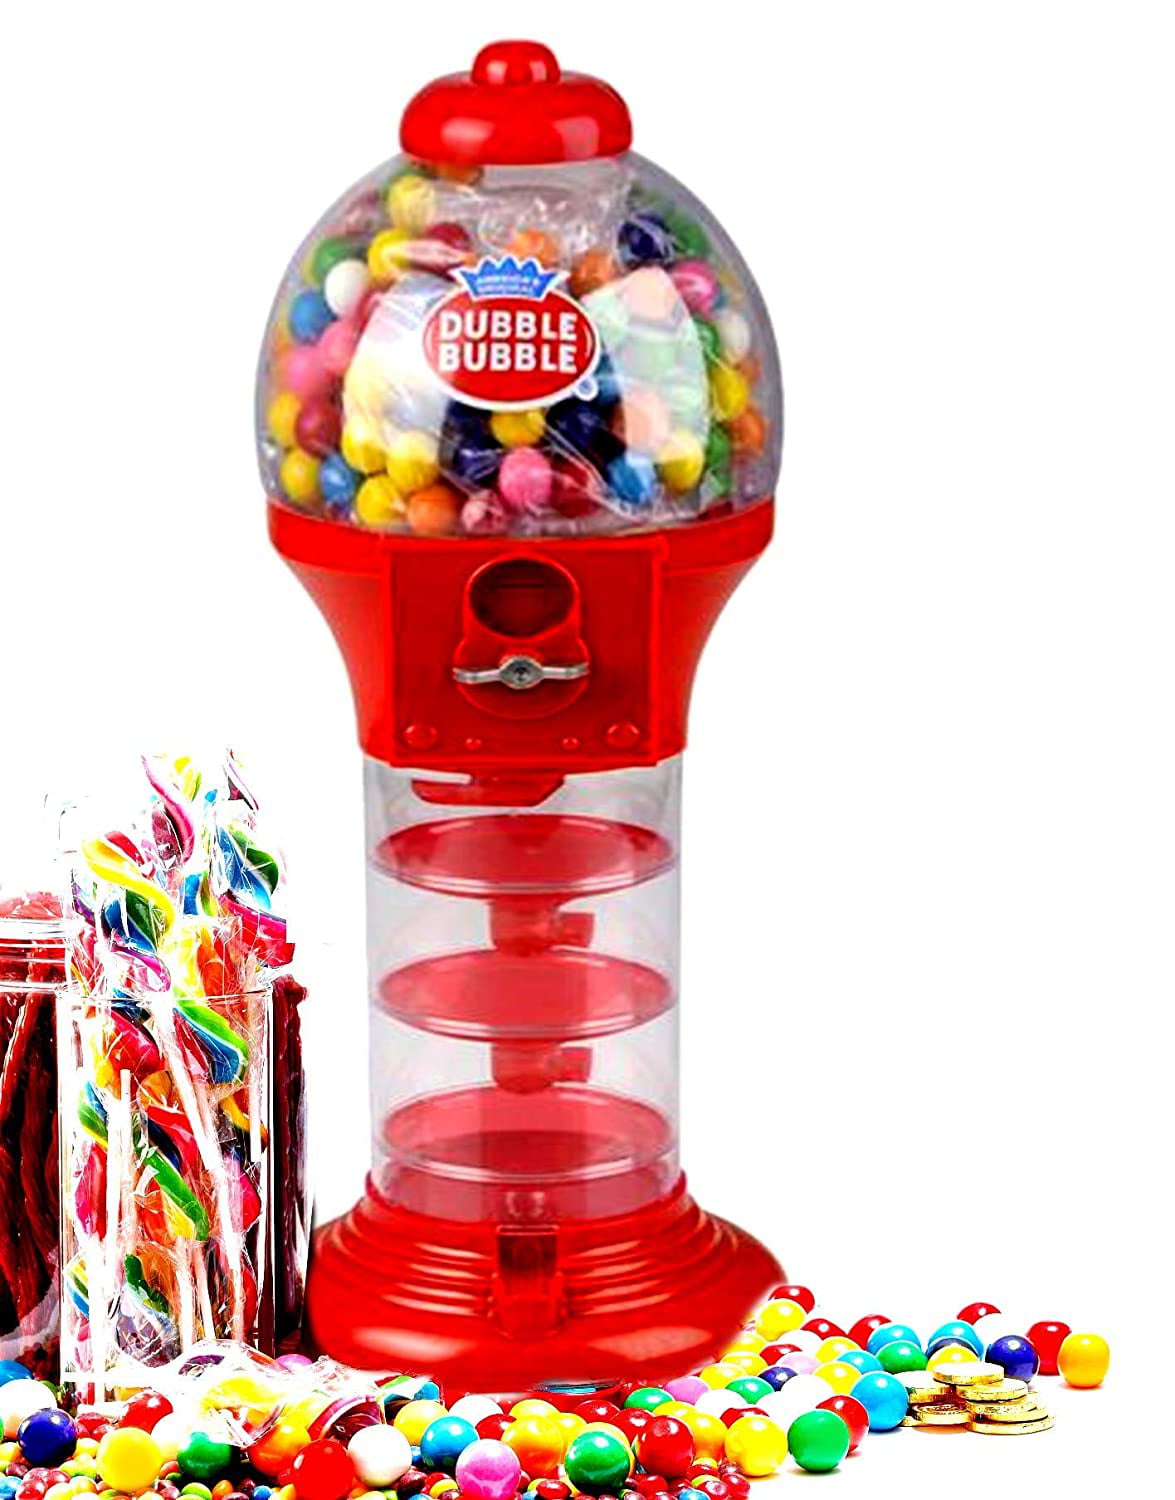 Playo 21 Light & Sound Gumball Machine for Kids with 113 Pcs